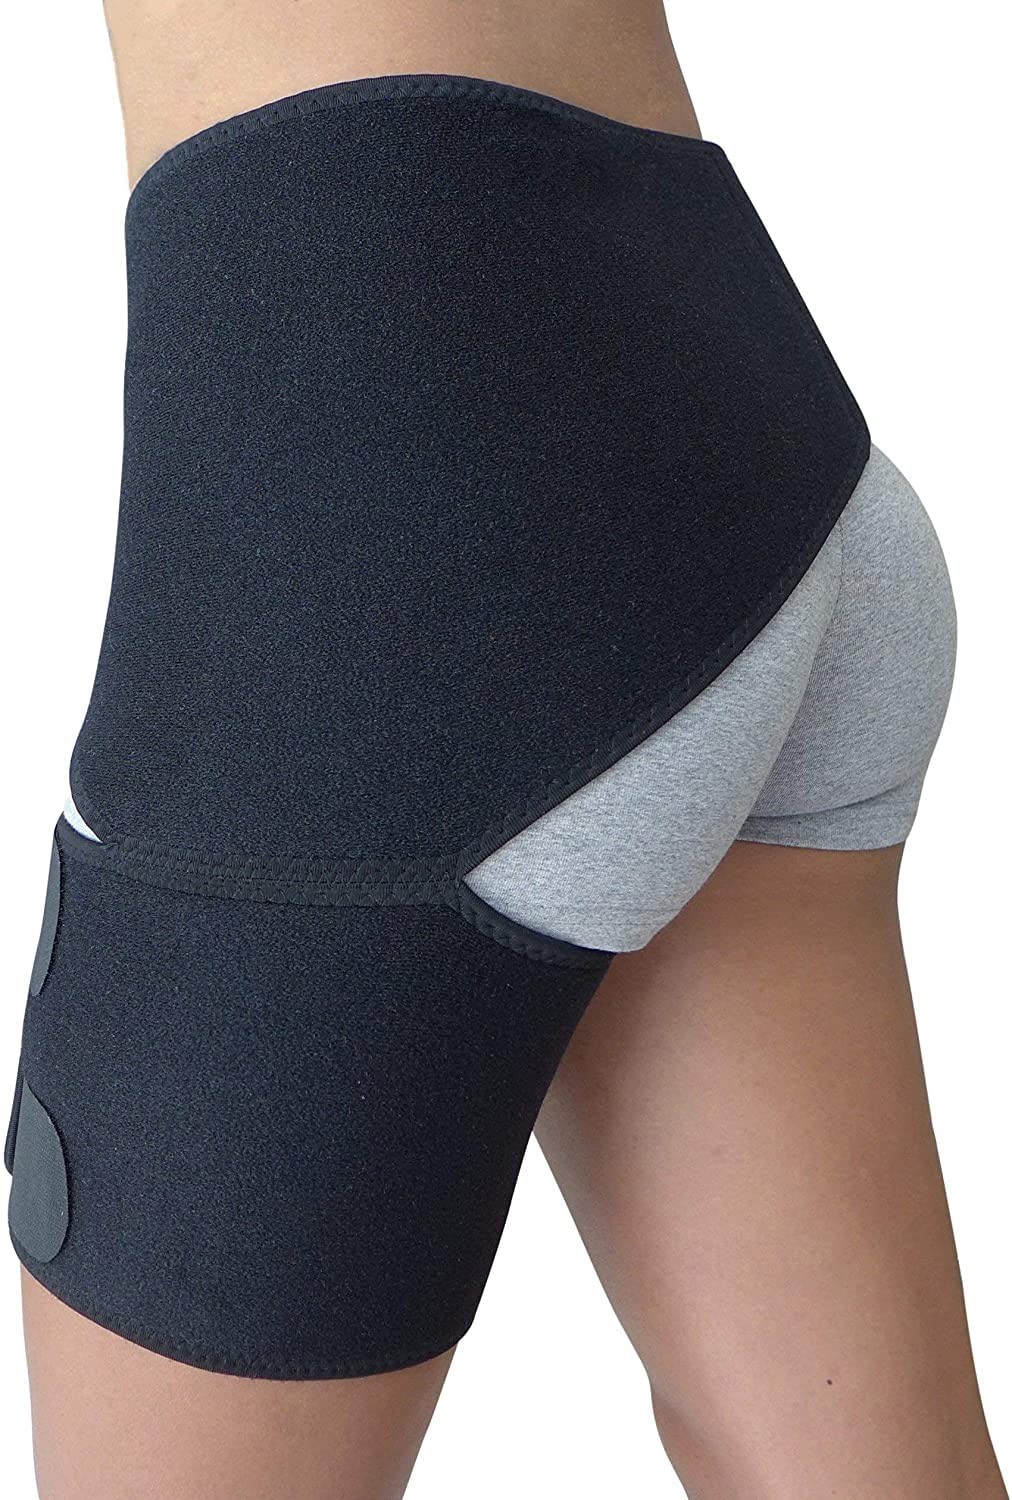 Hip Brace - Compression Groin Support Wrap for Sciatica Pain Relief Thigh  Hot